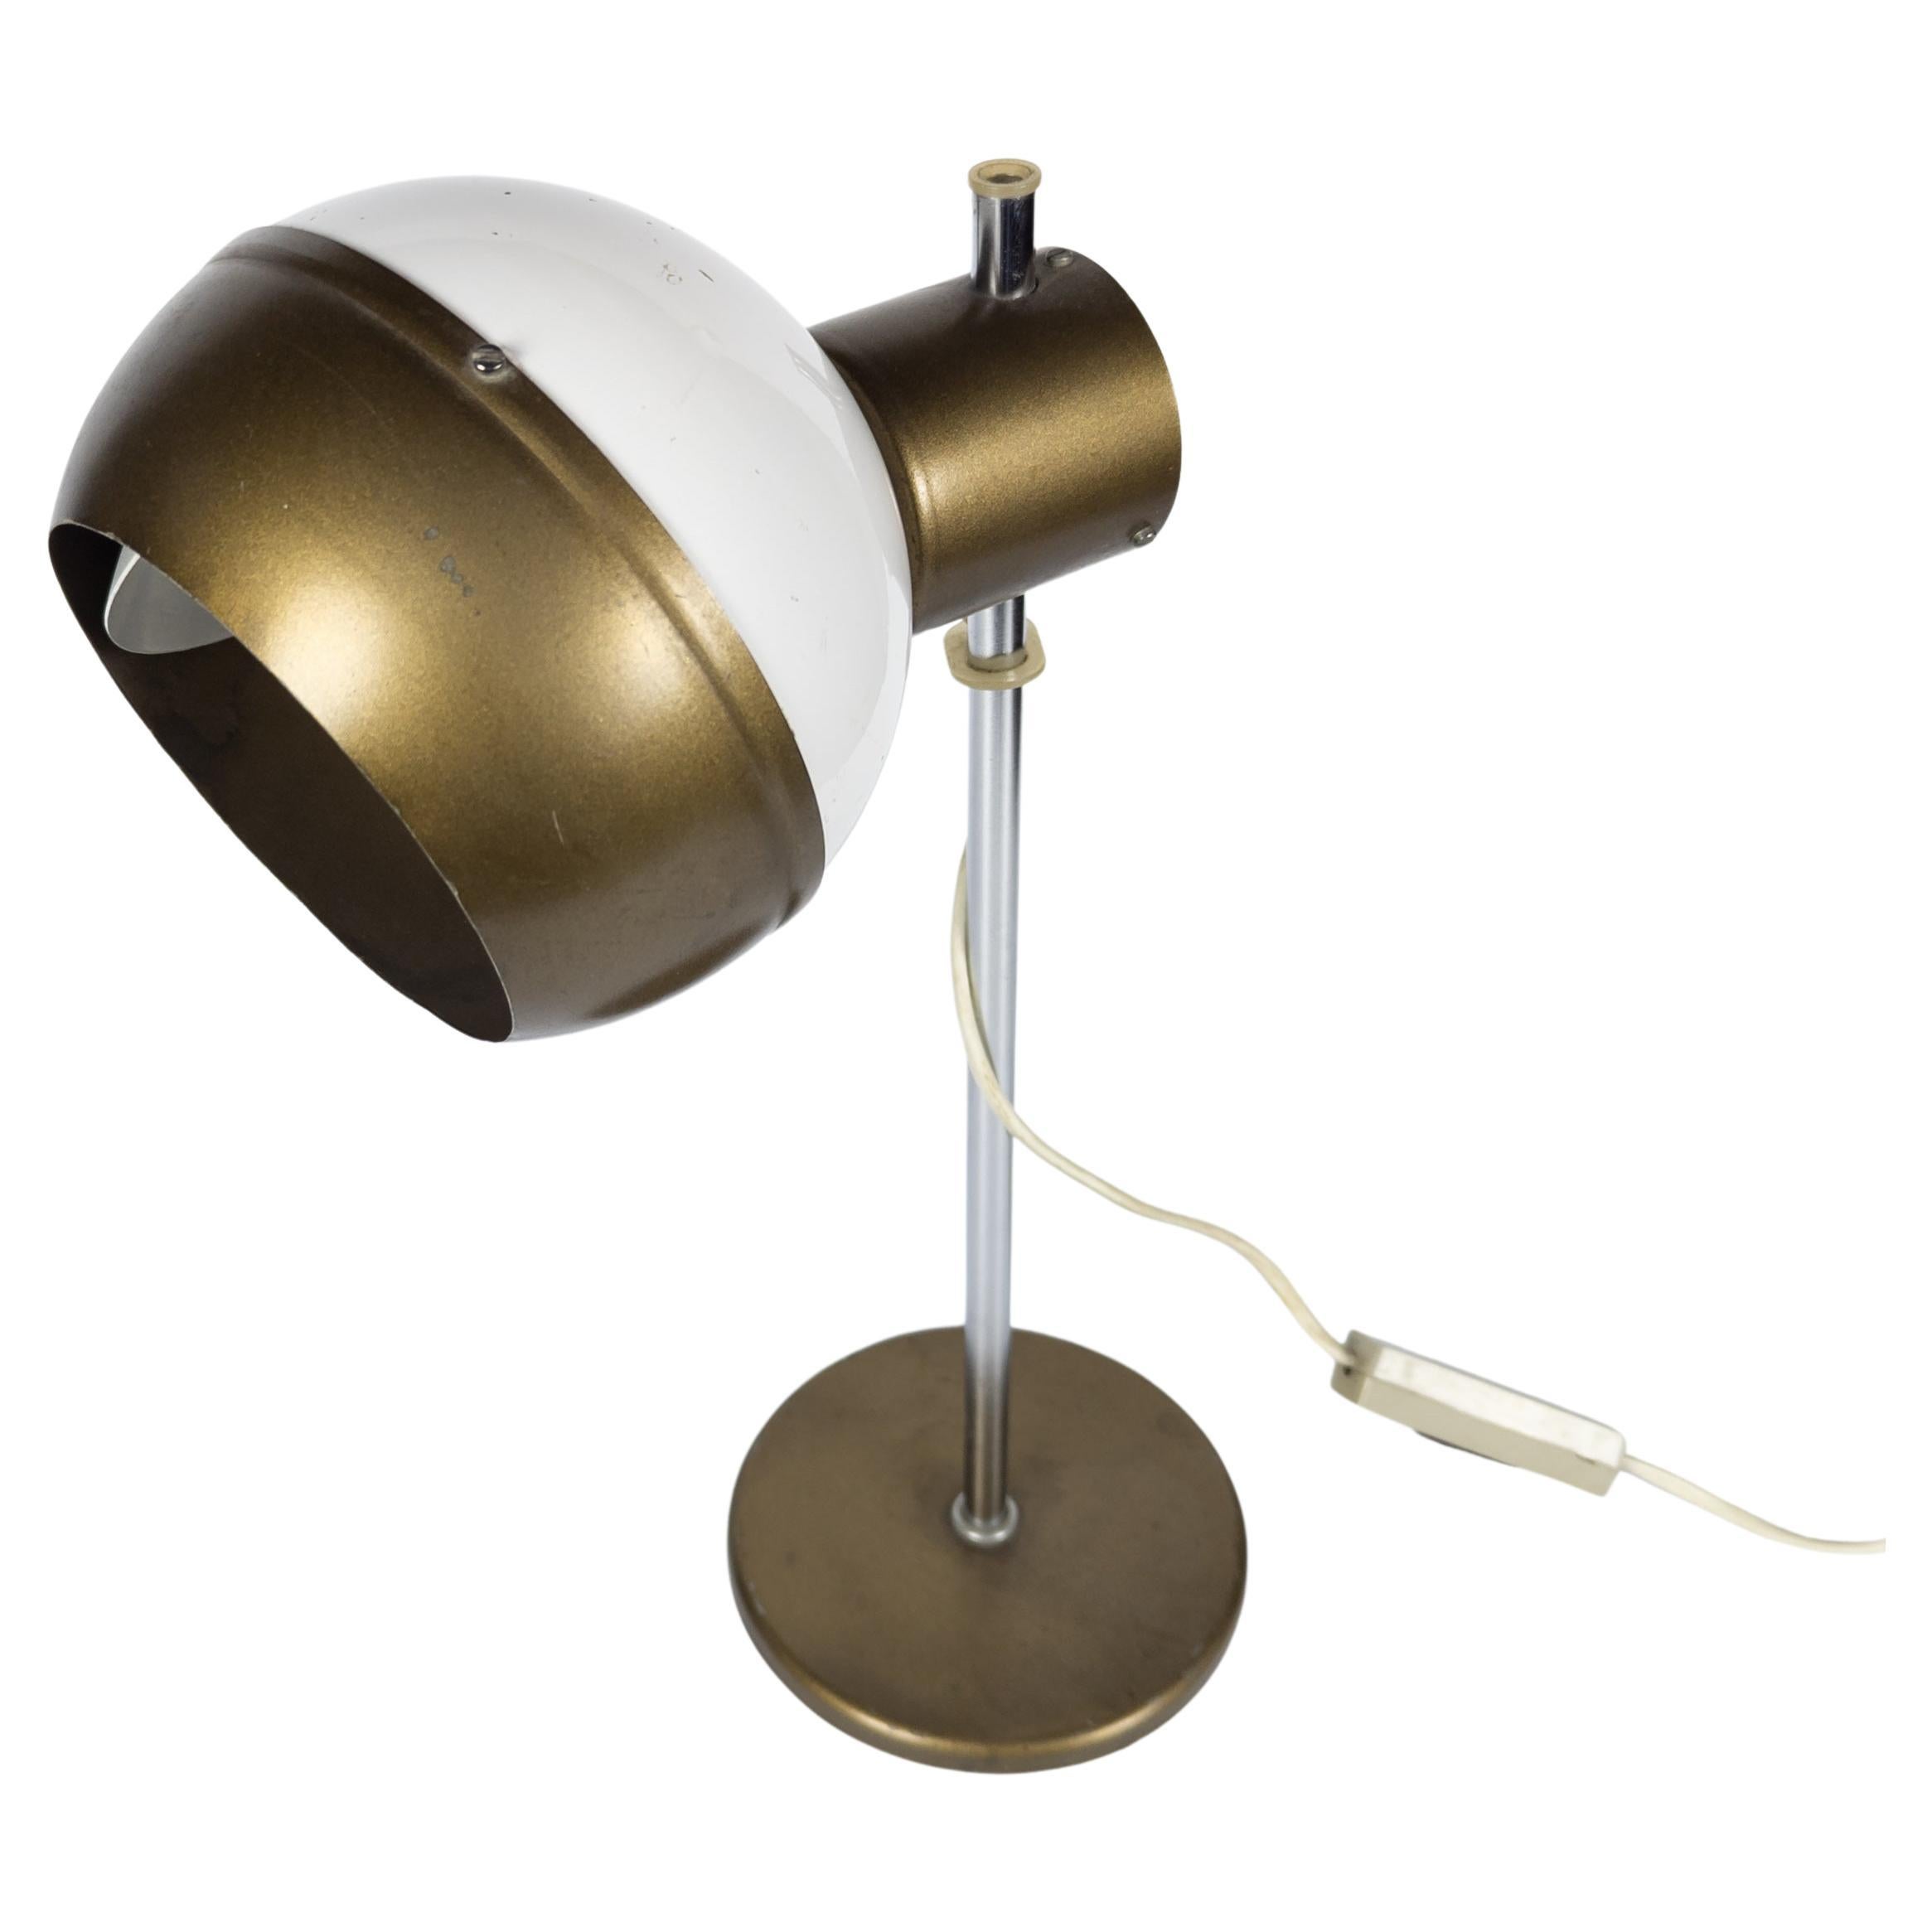 Adjustable Space Age table Lamp by Drukov